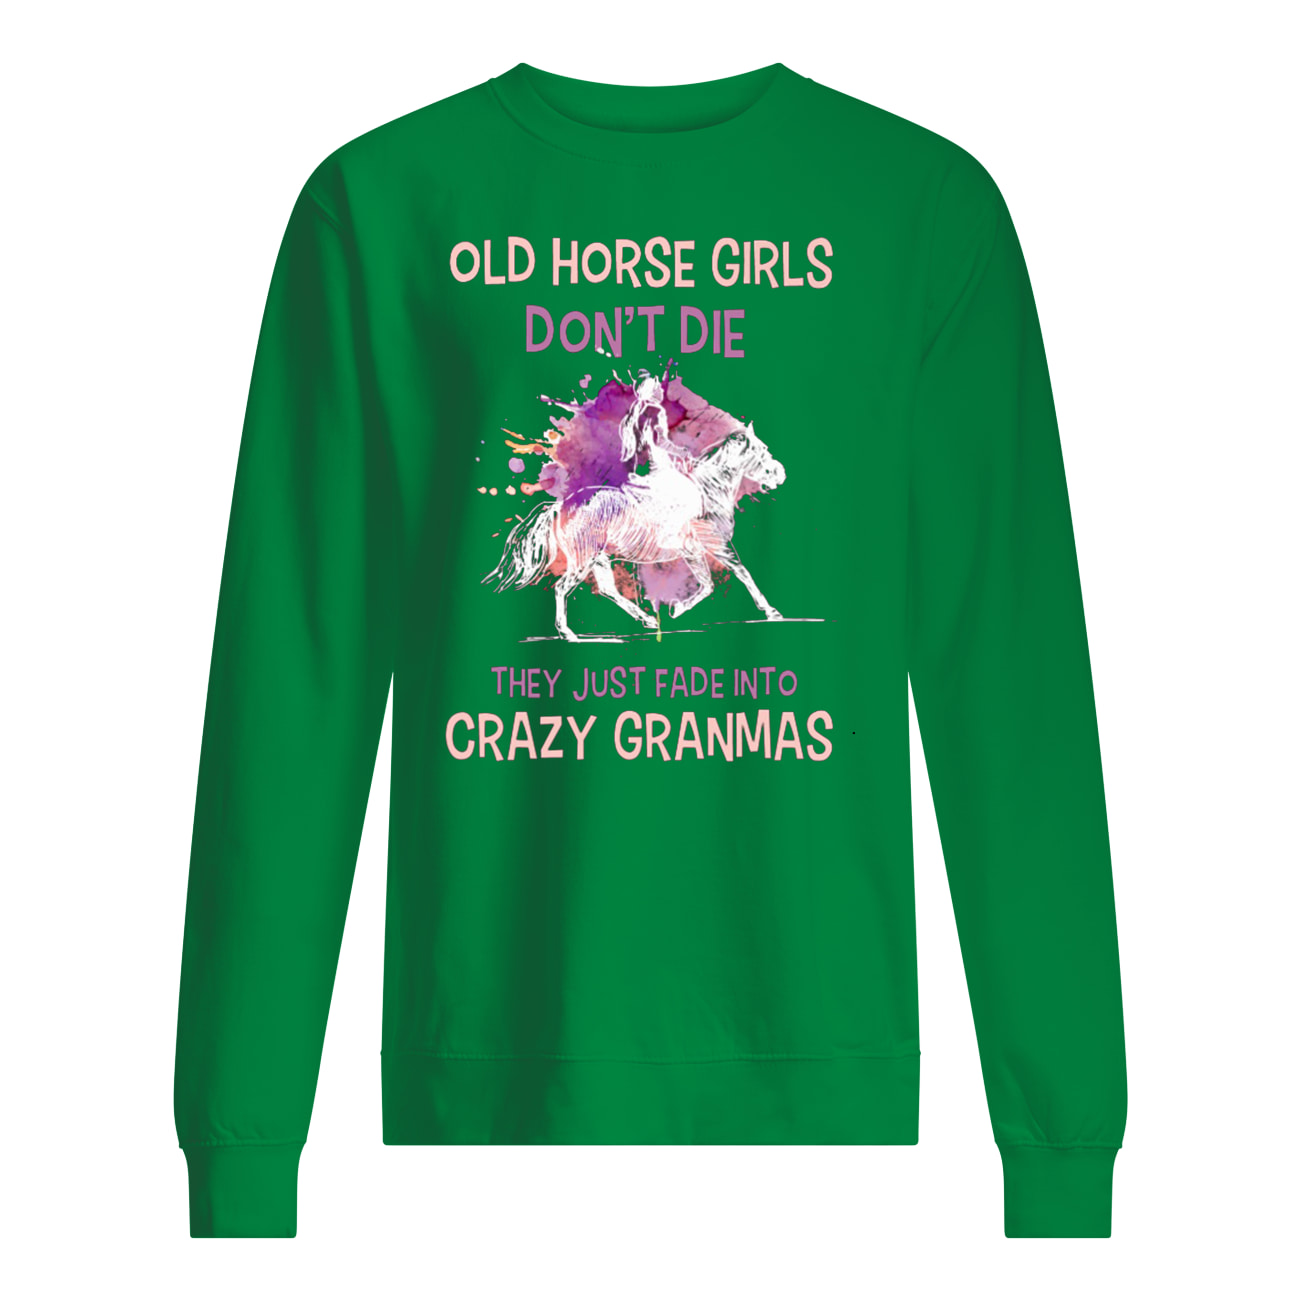 Old horse girls don't die they just fade into crazy granmas sweatshirt